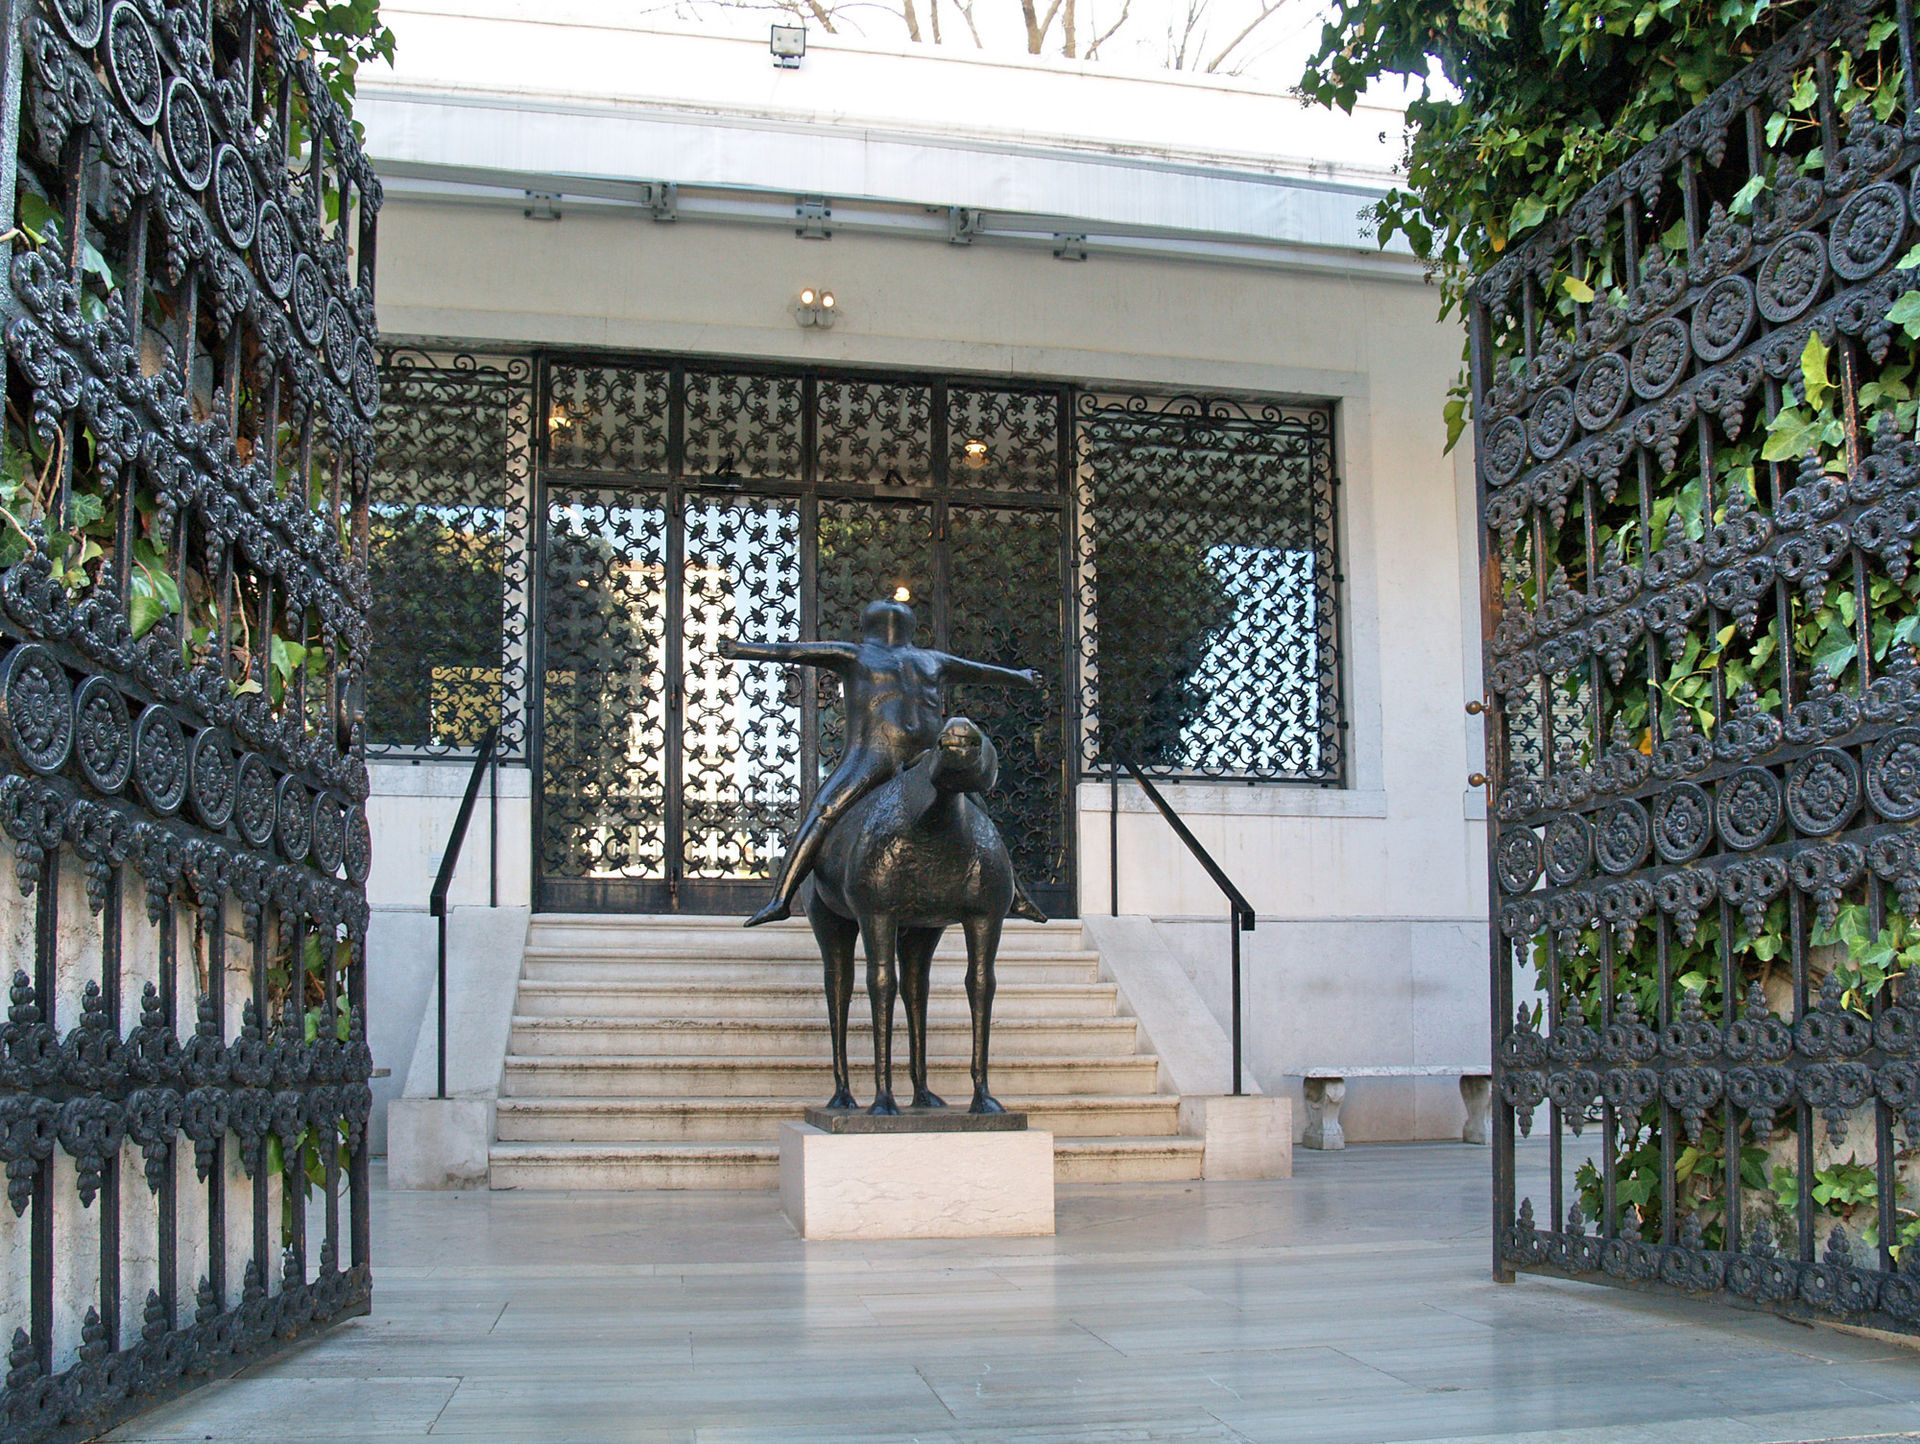 Entrance to Peggy Guggenheim Collection, Palazzo Venier dei Leoni, Venice. Photo by Edal, licensed under the Creative Commons Attribution-Share Alike 3.0 Unported license.